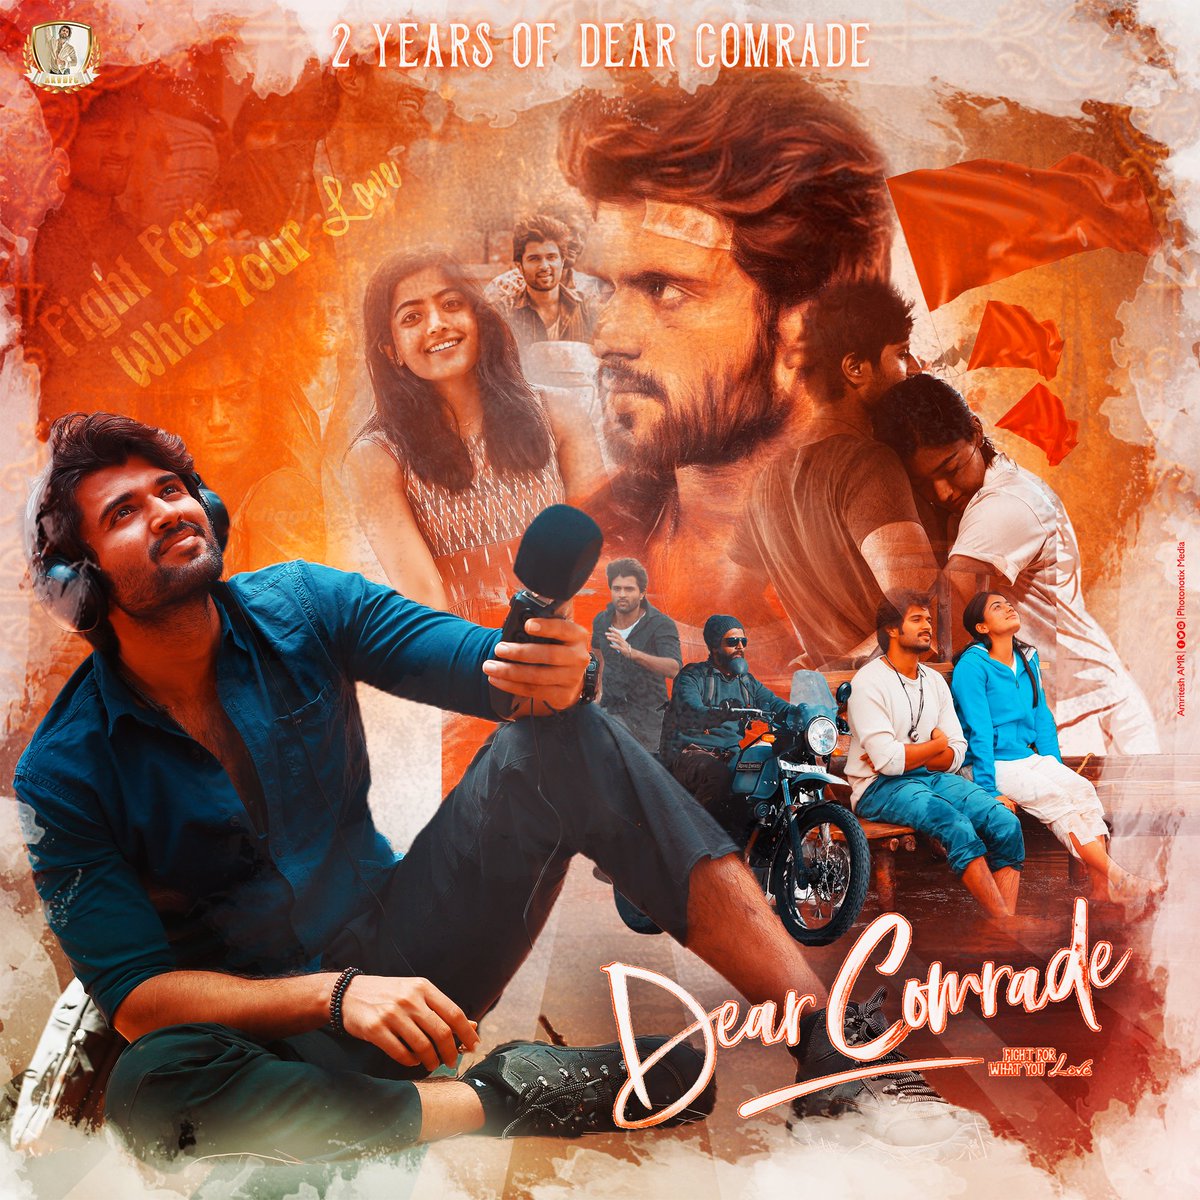 '2 Magical Years Of' #DearComrade

The Movie which has Magic blended with A beautiful Message

Thank you @bharatkamma garu for such a Movie.

Soothing Album with Heart Wrenching BGM by @justinprabhakaran

@TheDeverakonda @iamRashmika are Beautiful as ever.

#2YearsOfDearComrade